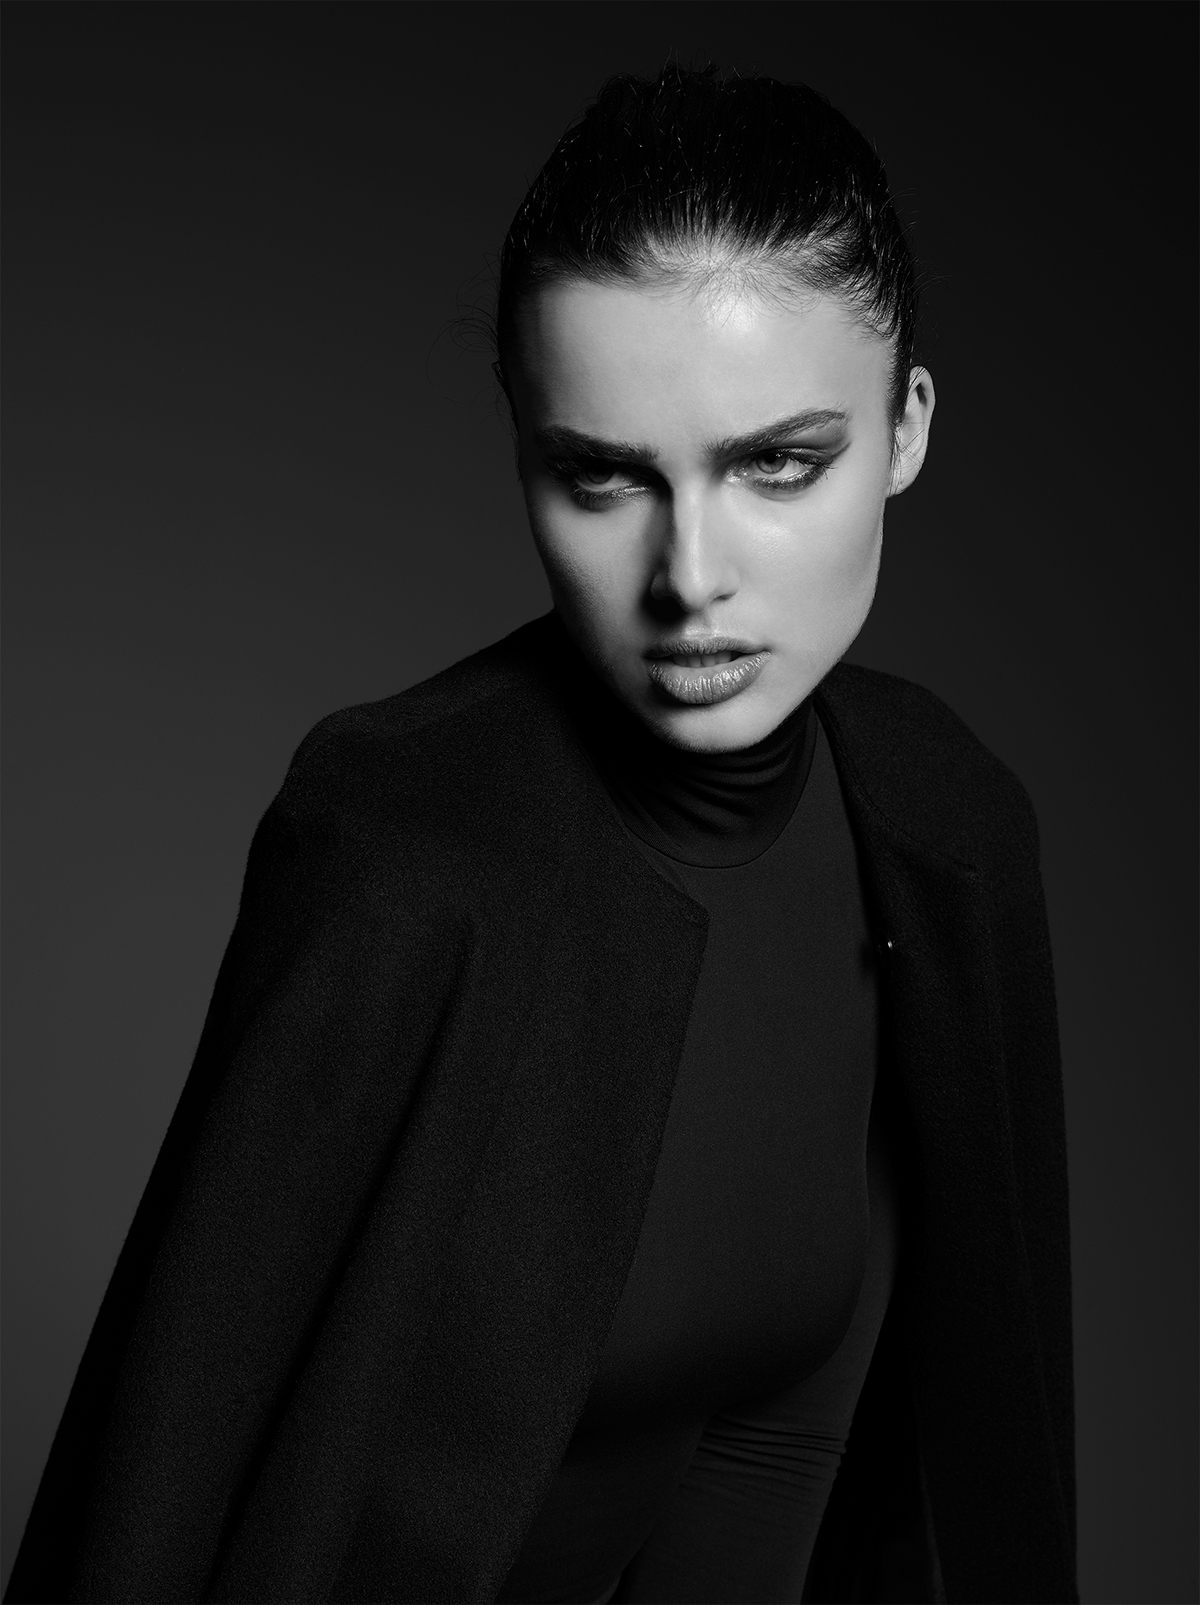 black & white editorial geometric strong looks Drowning piercing eyes